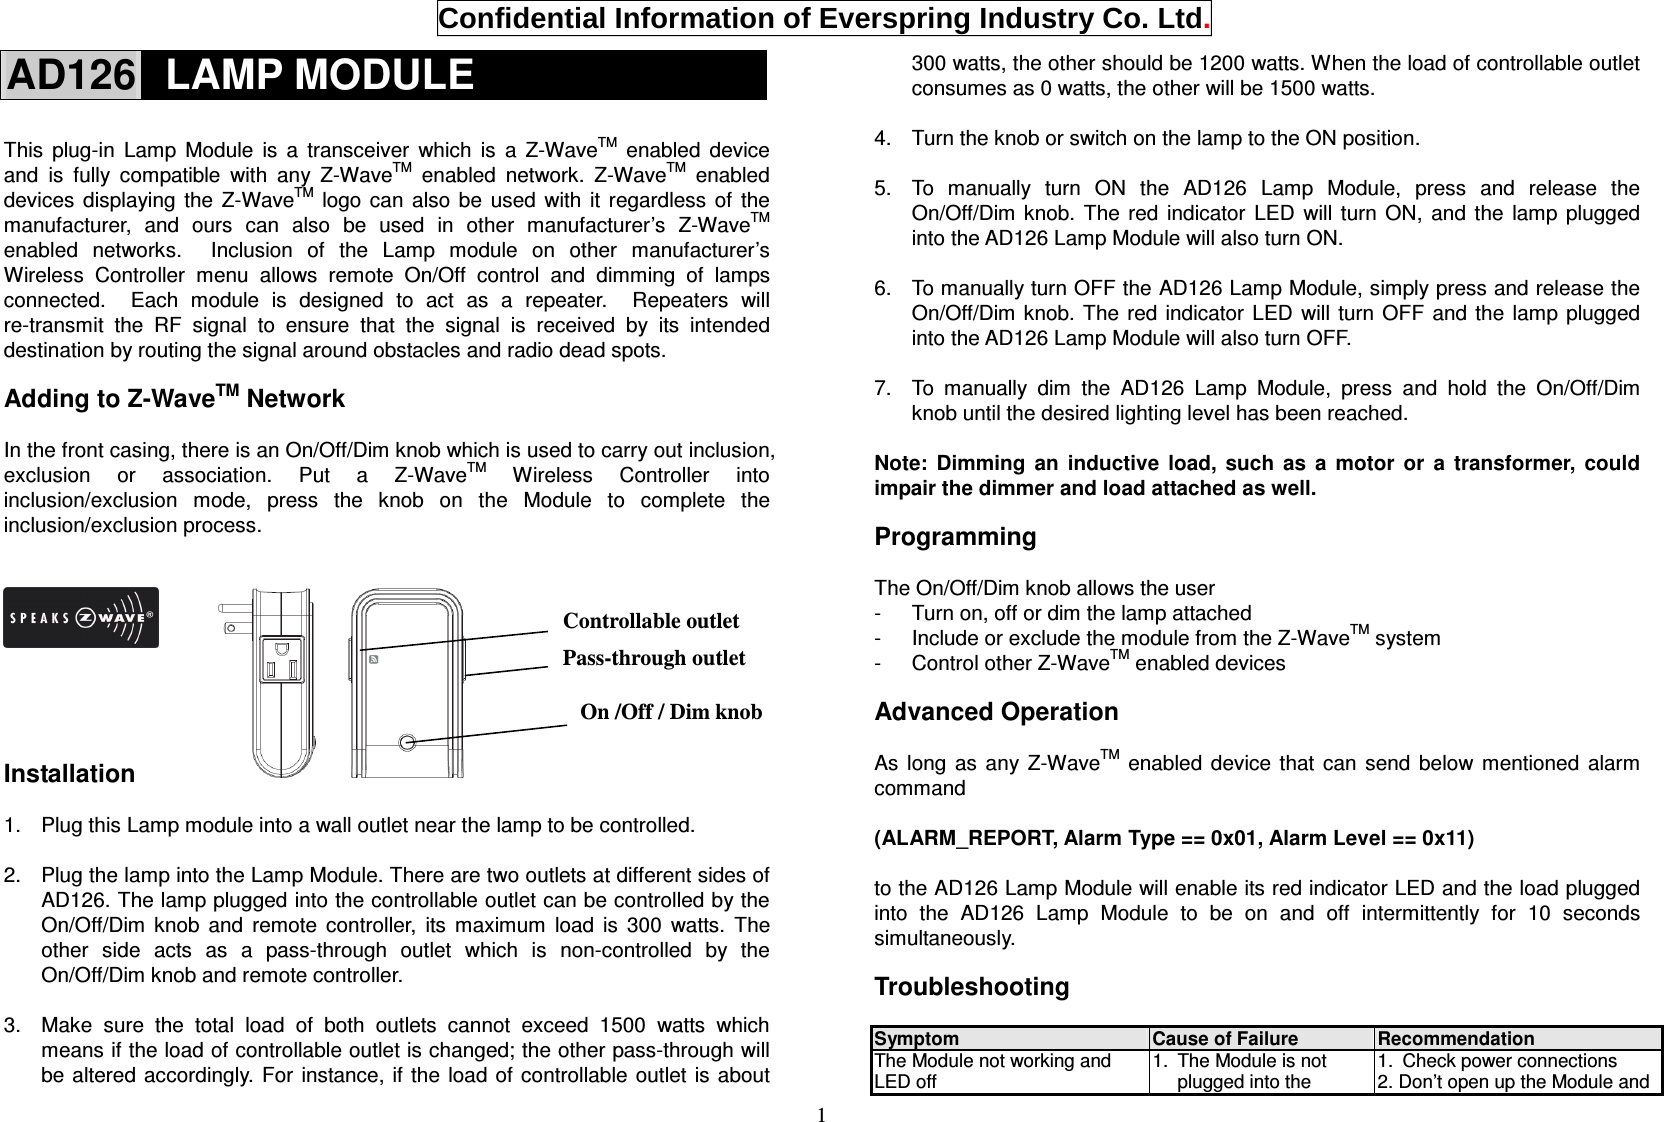  Confidential Information of Everspring Industry Co. Ltd. 1 AD126   LAMP MODULE  This  plug-in  Lamp  Module  is  a  transceiver  which  is  a  Z-WaveTM  enabled  device and  is  fully  compatible  with  any  Z-WaveTM  enabled  network.  Z-WaveTM  enabled devices  displaying  the  Z-WaveTM  logo can  also  be  used  with  it  regardless  of  the manufacturer,  and  ours  can  also  be  used  in  other  manufacturer’s  Z-WaveTM enabled  networks.    Inclusion  of  the  Lamp  module  on  other  manufacturer’s Wireless  Controller  menu  allows  remote  On/Off  control  and  dimming  of  lamps connected.    Each  module  is  designed  to  act  as  a  repeater.    Repeaters  will re-transmit  the  RF  signal  to  ensure  that  the  signal  is  received  by  its  intended destination by routing the signal around obstacles and radio dead spots.    Adding to Z-WaveTM Network  In the front casing, there is an On/Off/Dim knob which is used to carry out inclusion, exclusion  or  association.  Put  a  Z-WaveTM  Wireless  Controller  into inclusion/exclusion  mode,  press  the  knob  on  the  Module  to  complete  the inclusion/exclusion process.          Installation  1.  Plug this Lamp module into a wall outlet near the lamp to be controlled.  2.  Plug the lamp into the Lamp Module. There are two outlets at different sides of AD126. The lamp plugged into the controllable outlet can be controlled by the On/Off/Dim  knob  and  remote  controller,  its  maximum  load  is  300  watts.  The other  side  acts  as  a  pass-through  outlet  which  is  non-controlled  by  the On/Off/Dim knob and remote controller.  3.  Make  sure  the  total  load  of  both  outlets  cannot  exceed  1500  watts  which means if the load of controllable outlet is changed; the other pass-through will be altered  accordingly. For instance, if the  load of  controllable outlet is about 300 watts, the other should be 1200 watts. When the load of controllable outlet consumes as 0 watts, the other will be 1500 watts.  4.  Turn the knob or switch on the lamp to the ON position.  5.  To  manually  turn  ON  the  AD126  Lamp  Module,  press  and  release  the On/Off/Dim  knob.  The  red  indicator  LED  will  turn  ON,  and  the  lamp  plugged into the AD126 Lamp Module will also turn ON.  6.  To manually turn OFF the AD126 Lamp Module, simply press and release the On/Off/Dim knob. The  red indicator  LED  will turn  OFF  and the  lamp  plugged into the AD126 Lamp Module will also turn OFF.  7.  To  manually  dim  the  AD126  Lamp  Module,  press  and  hold  the  On/Off/Dim knob until the desired lighting level has been reached.  Note:  Dimming  an  inductive  load,  such  as  a  motor  or  a  transformer,  could impair the dimmer and load attached as well.  Programming  The On/Off/Dim knob allows the user -  Turn on, off or dim the lamp attached -  Include or exclude the module from the Z-WaveTM system -  Control other Z-WaveTM enabled devices  Advanced Operation  As  long  as  any  Z-WaveTM  enabled  device  that  can  send  below  mentioned  alarm command  (ALARM_REPORT, Alarm Type == 0x01, Alarm Level == 0x11)  to the AD126 Lamp Module will enable its red indicator LED and the load plugged into  the  AD126  Lamp  Module  to  be  on  and  off  intermittently  for  10  seconds simultaneously.  Troubleshooting                   Symptom  Cause of Failure  Recommendation The Module not working and LED off 1.  The Module is not plugged into the 1.  Check power connections 2. Don’t open up the Module and On /Off / Dim knob Controllable outlet Pass-through outlet 